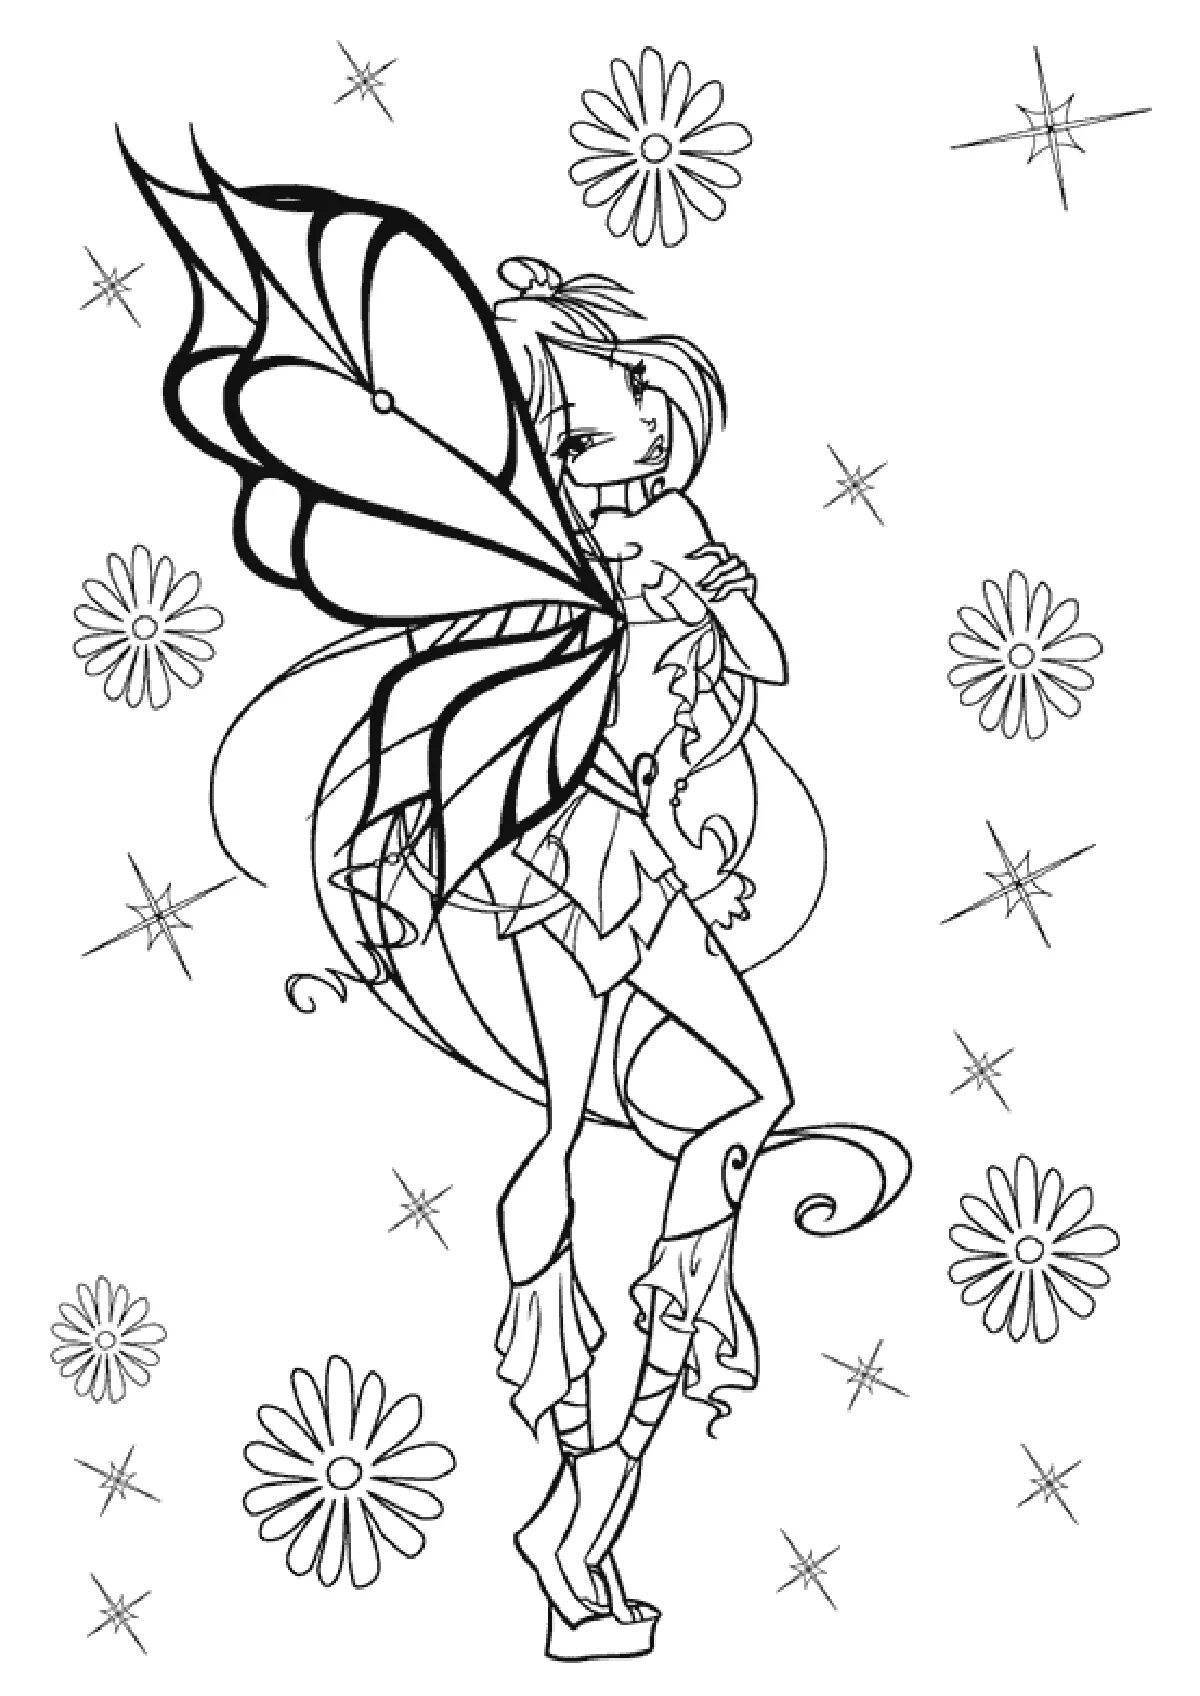 Exquisite Winx Christmas coloring book